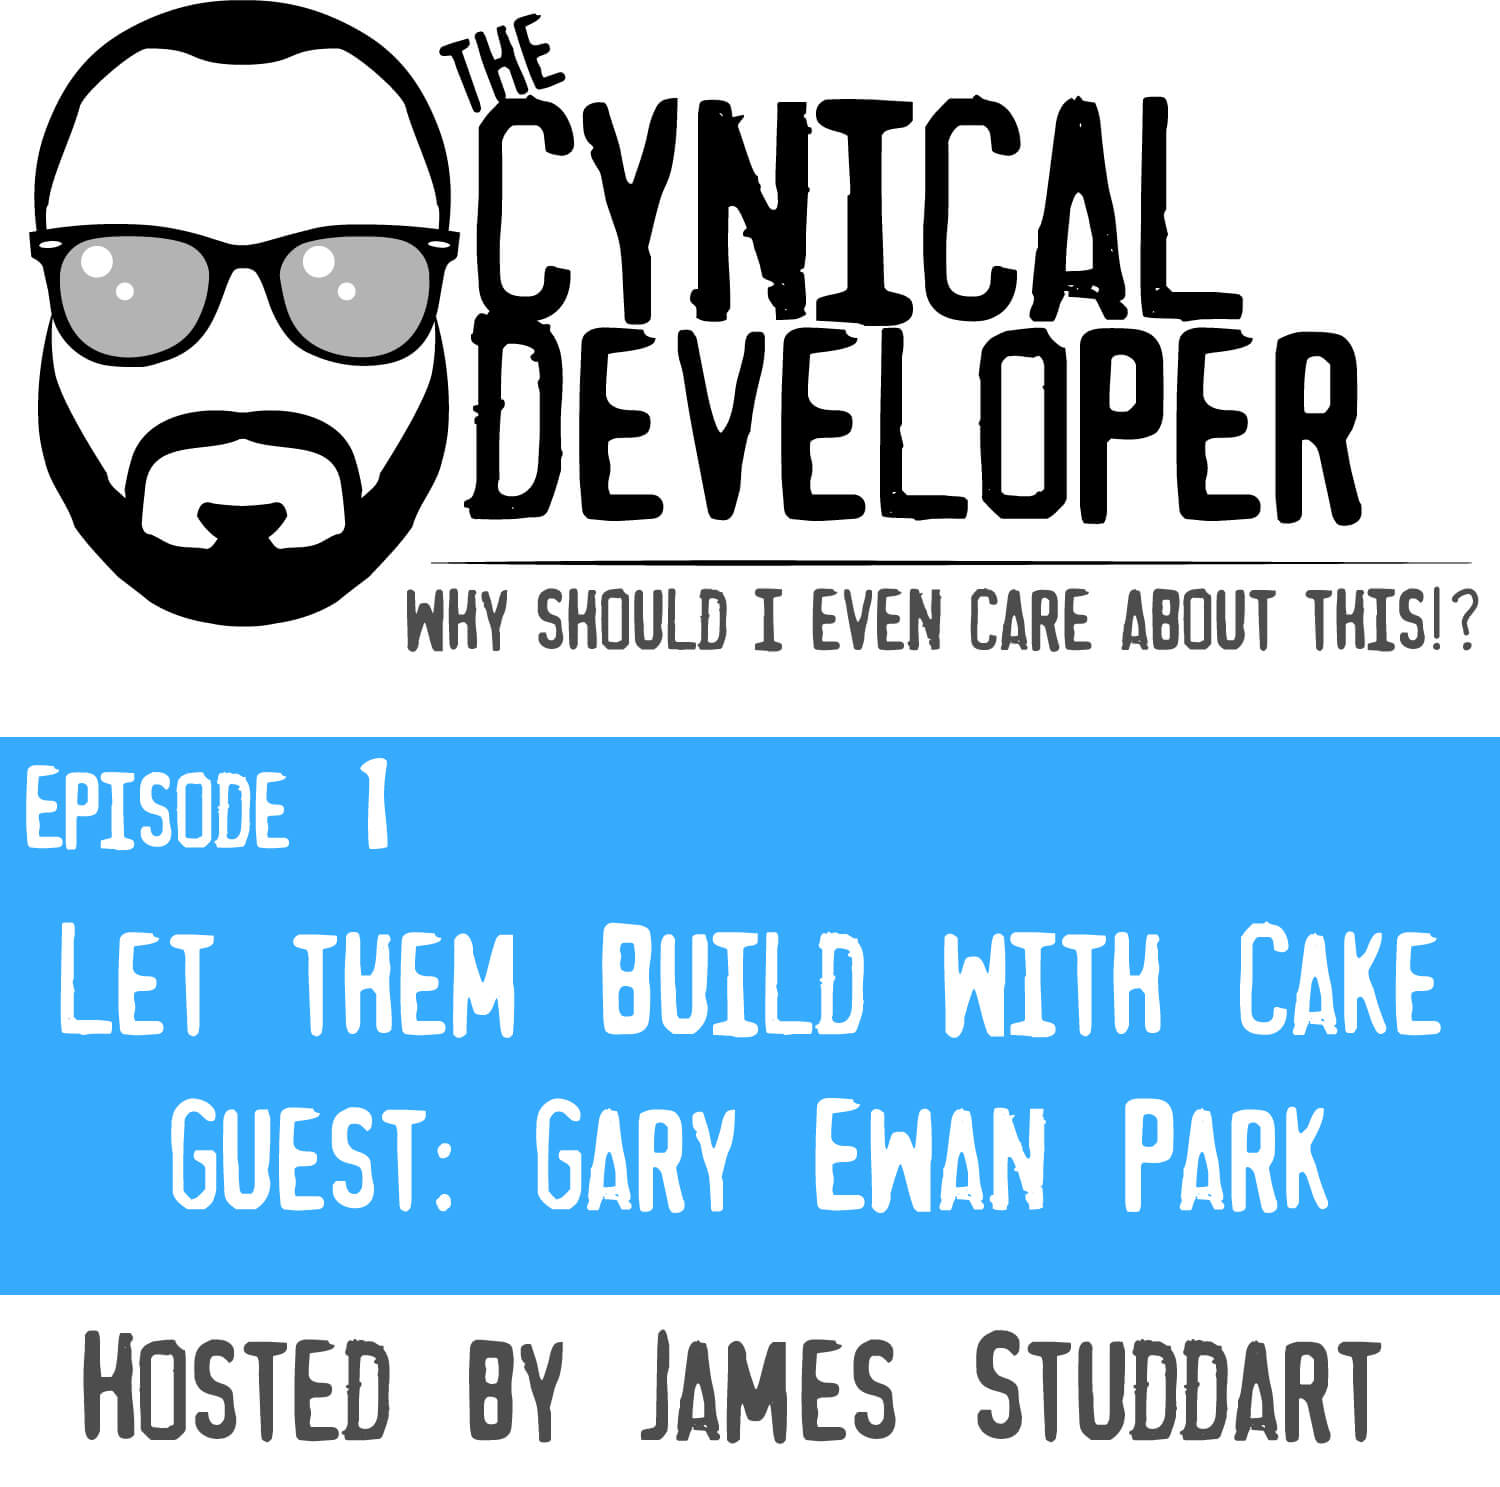 Episode 1 - Let them build with Cake!